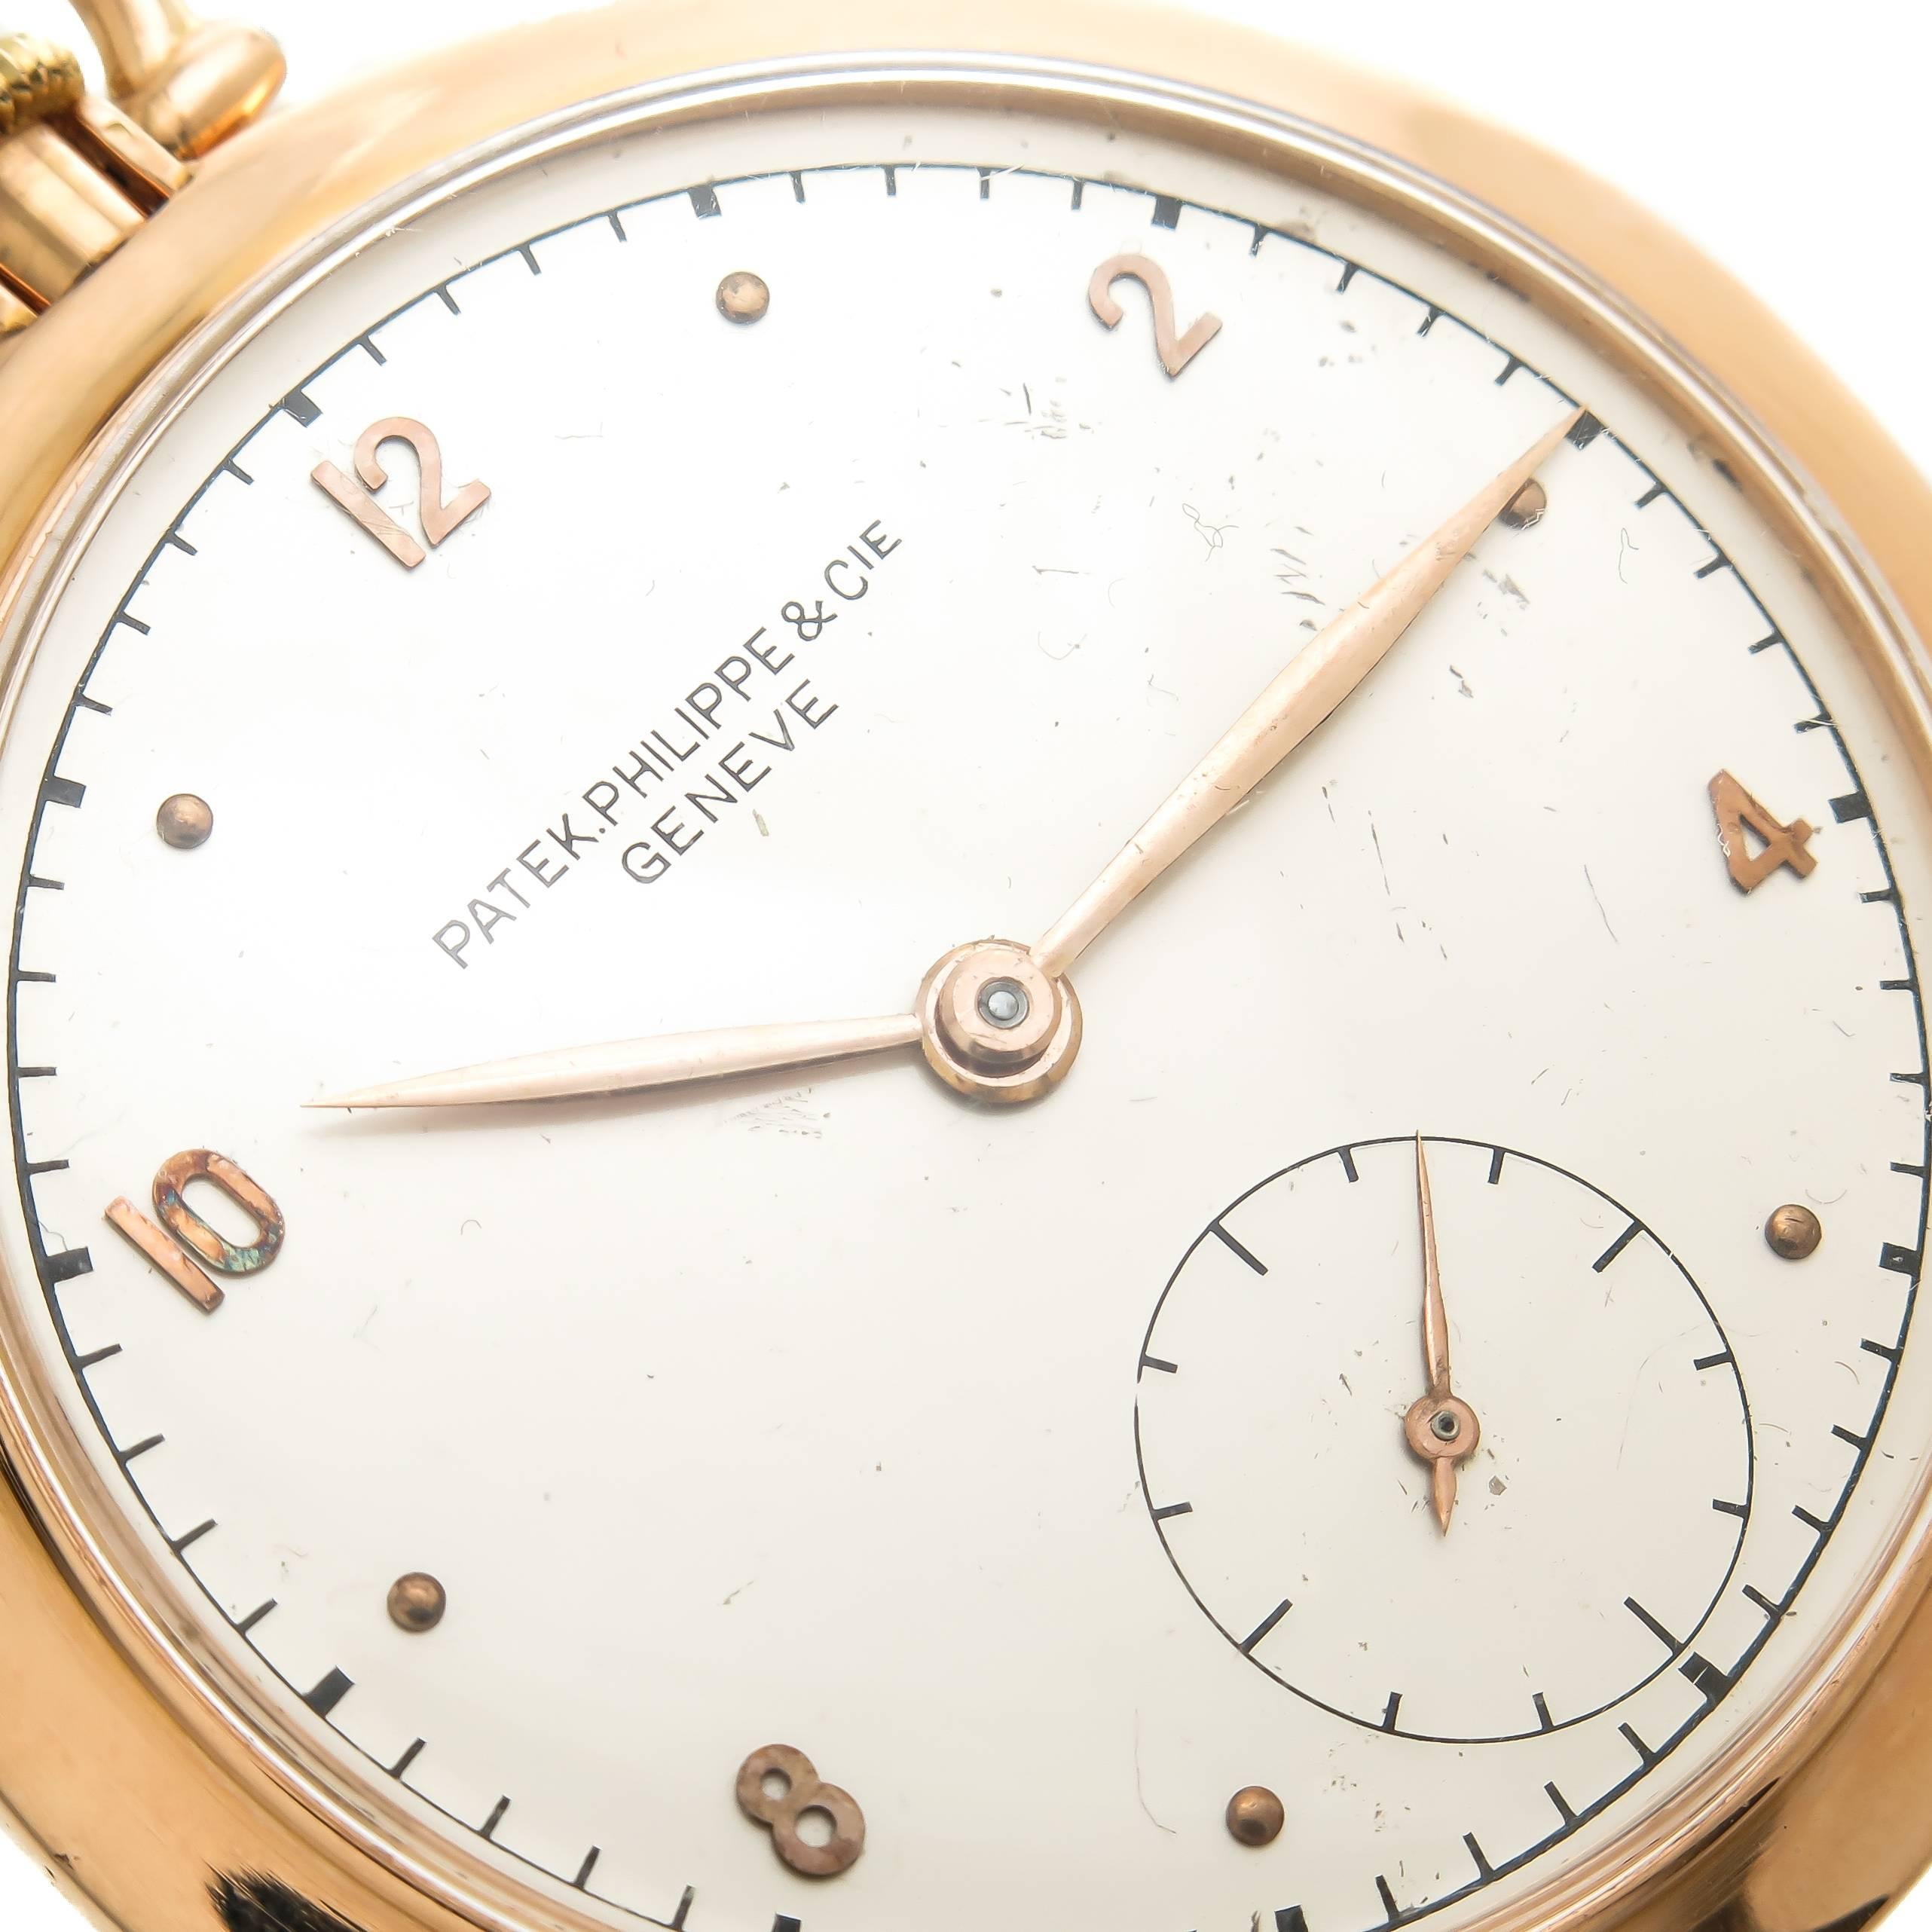 Circa 1940s Patek Philippe Pocket watch, 46 MM 2 Piece 18K Rose Gold Case, 9 MM thick. 18 Jewel Mechanical, manual wind Nickel Lever Movement. Silvered Dial with Raised Rose Gold Markers and Rose Gold Hands. Signed and Numbered Case and Movement.